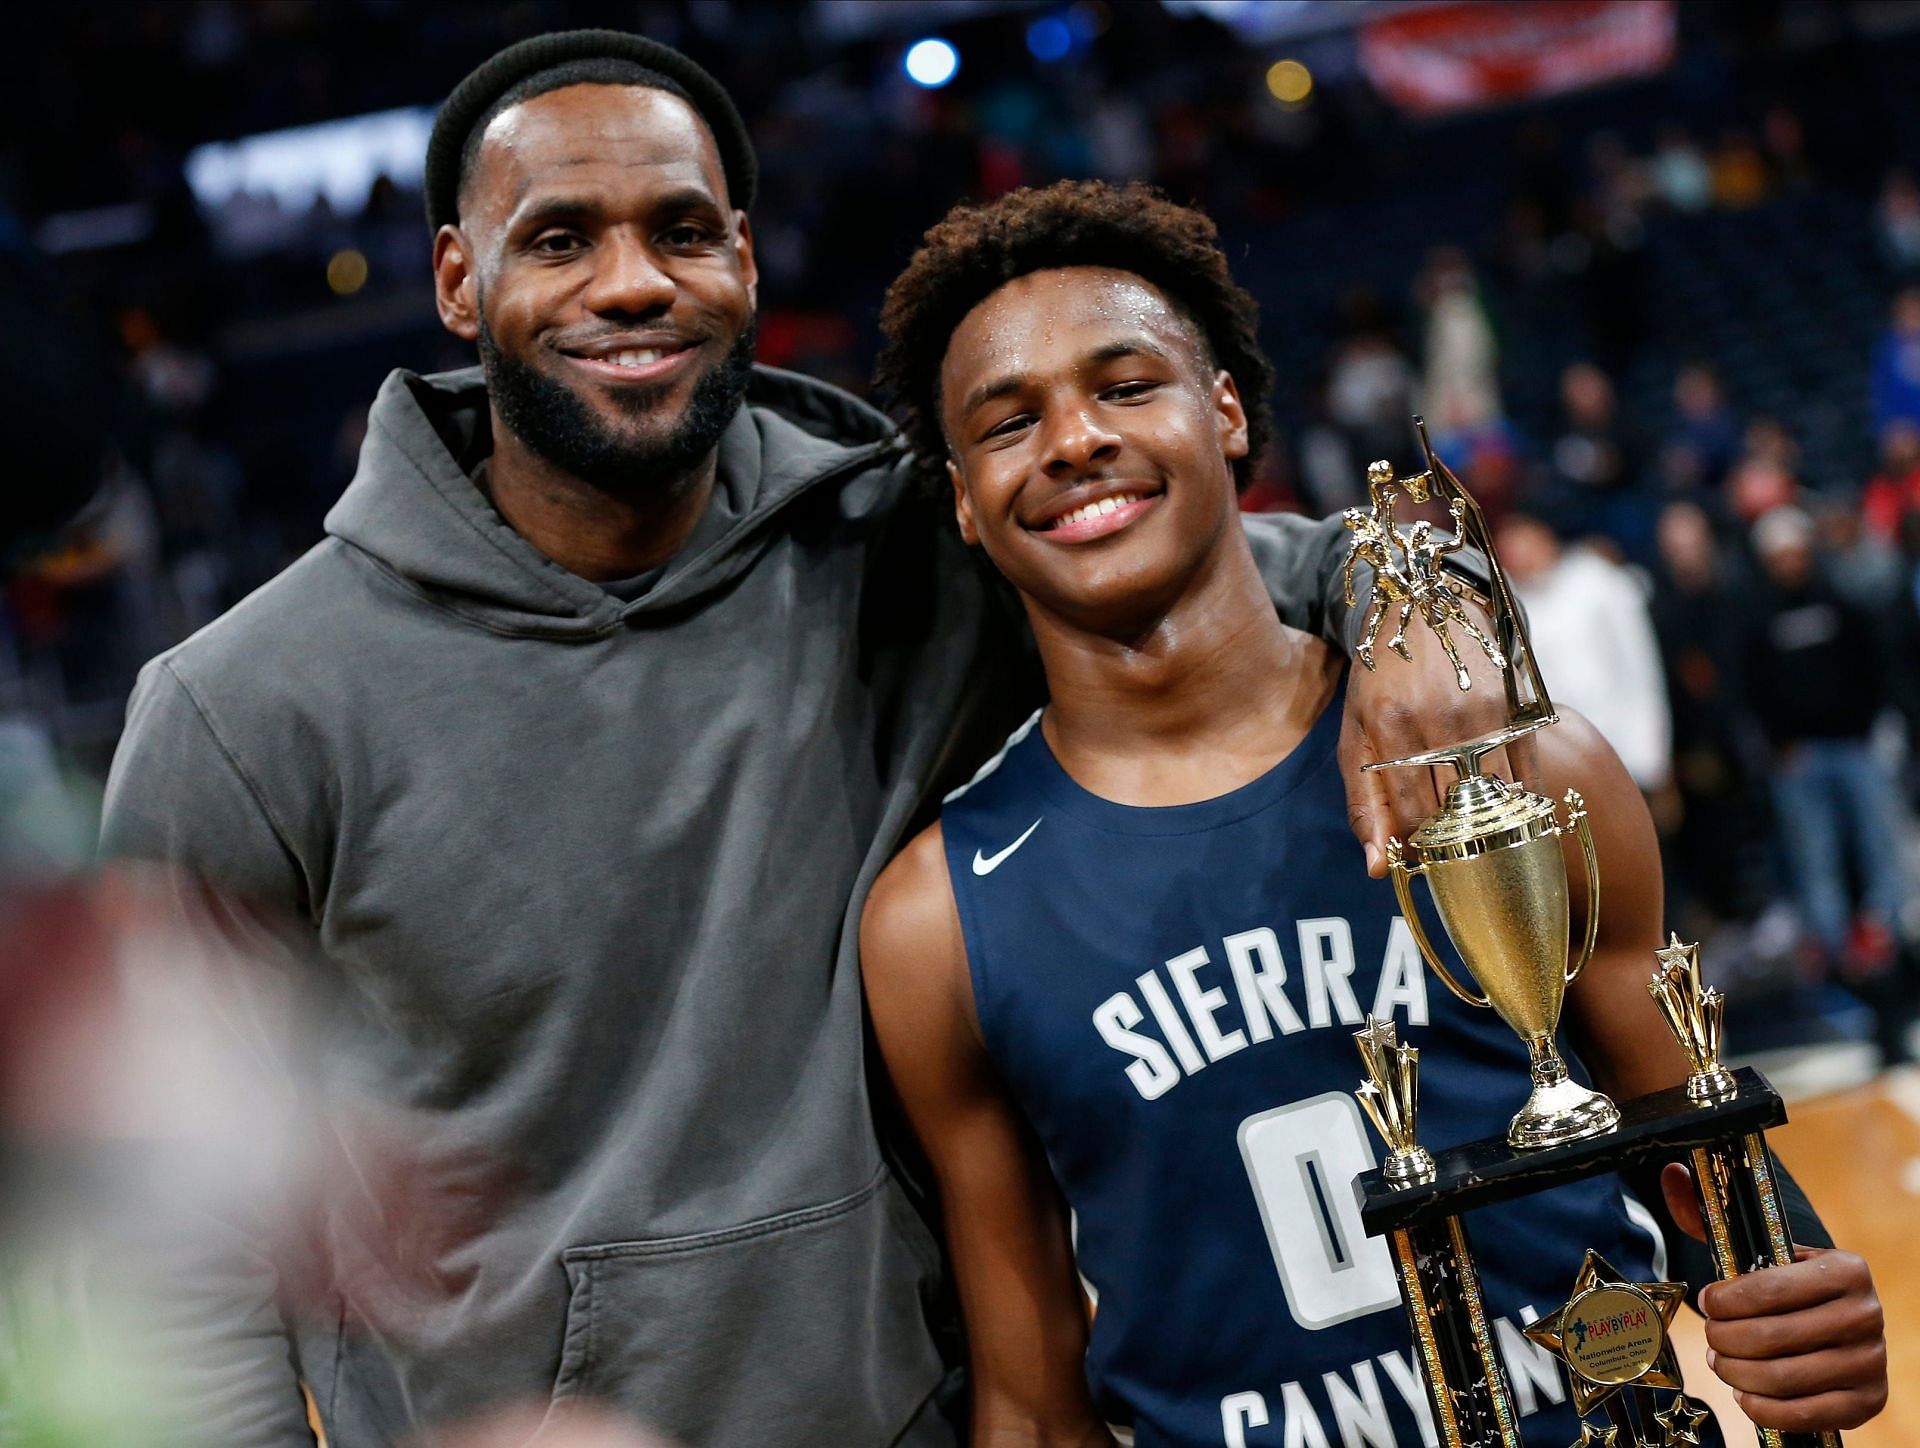 Los Angeles Lakers forward LeBron James with his son, Bronny James